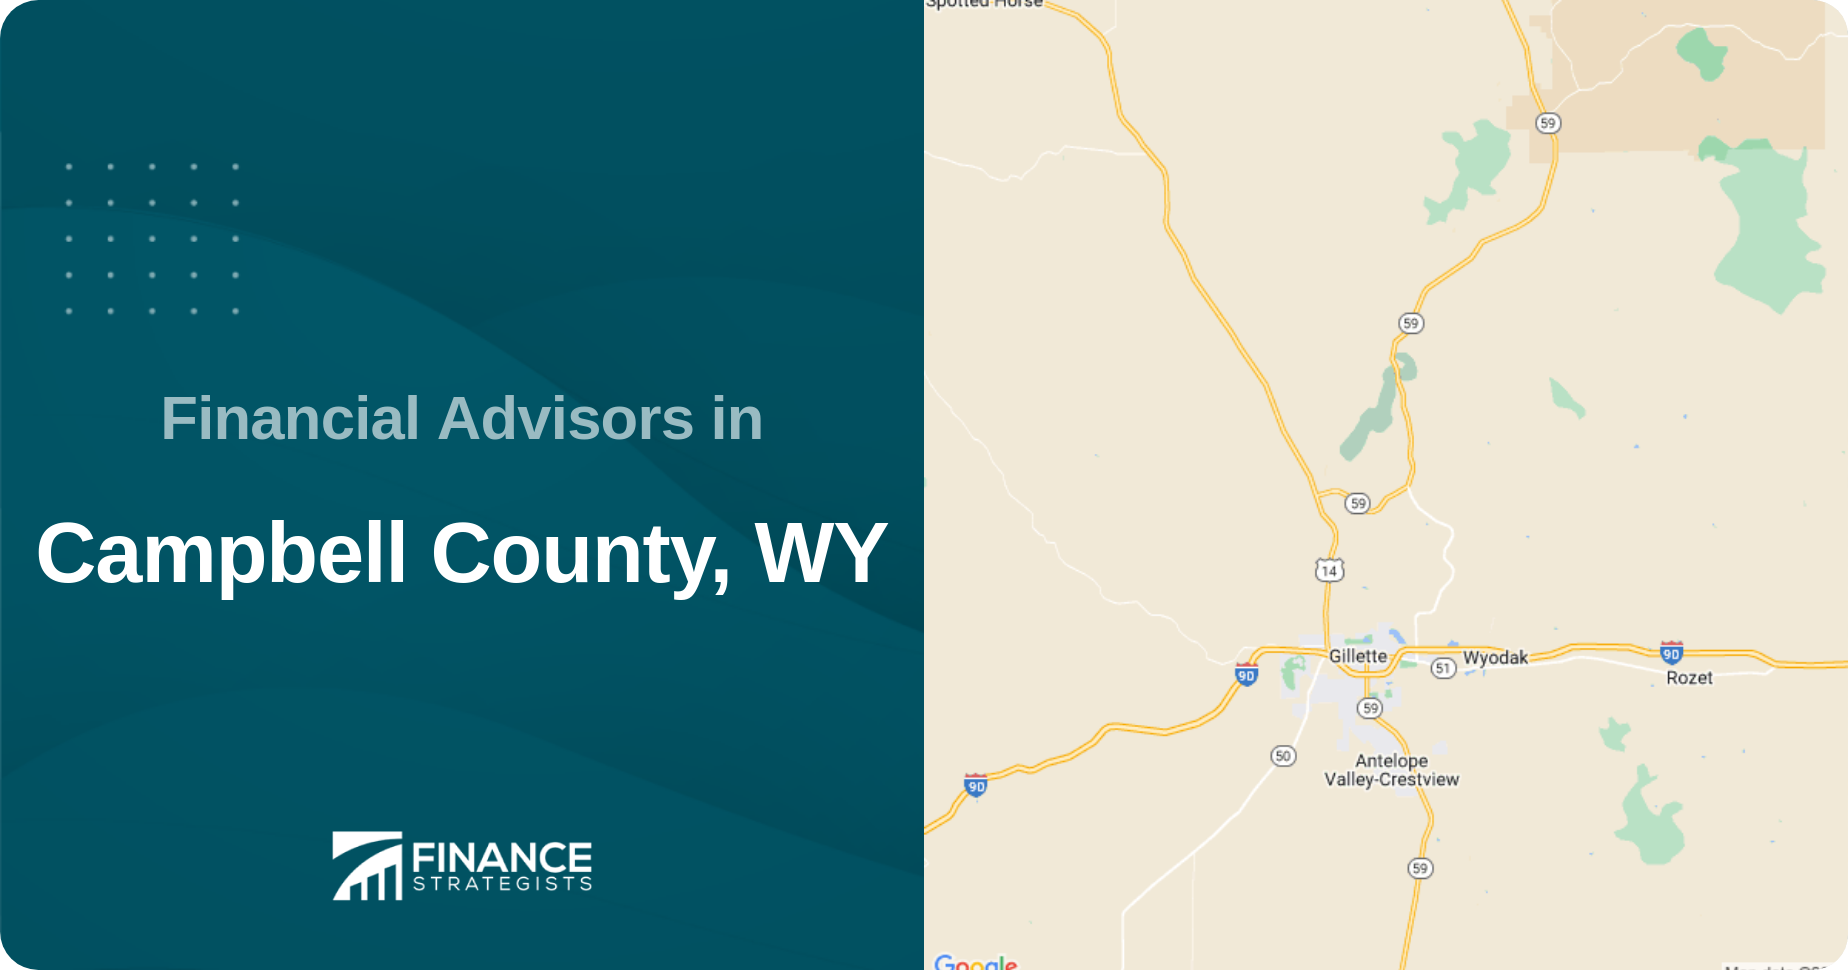 Financial Advisors in Campbell County, WY